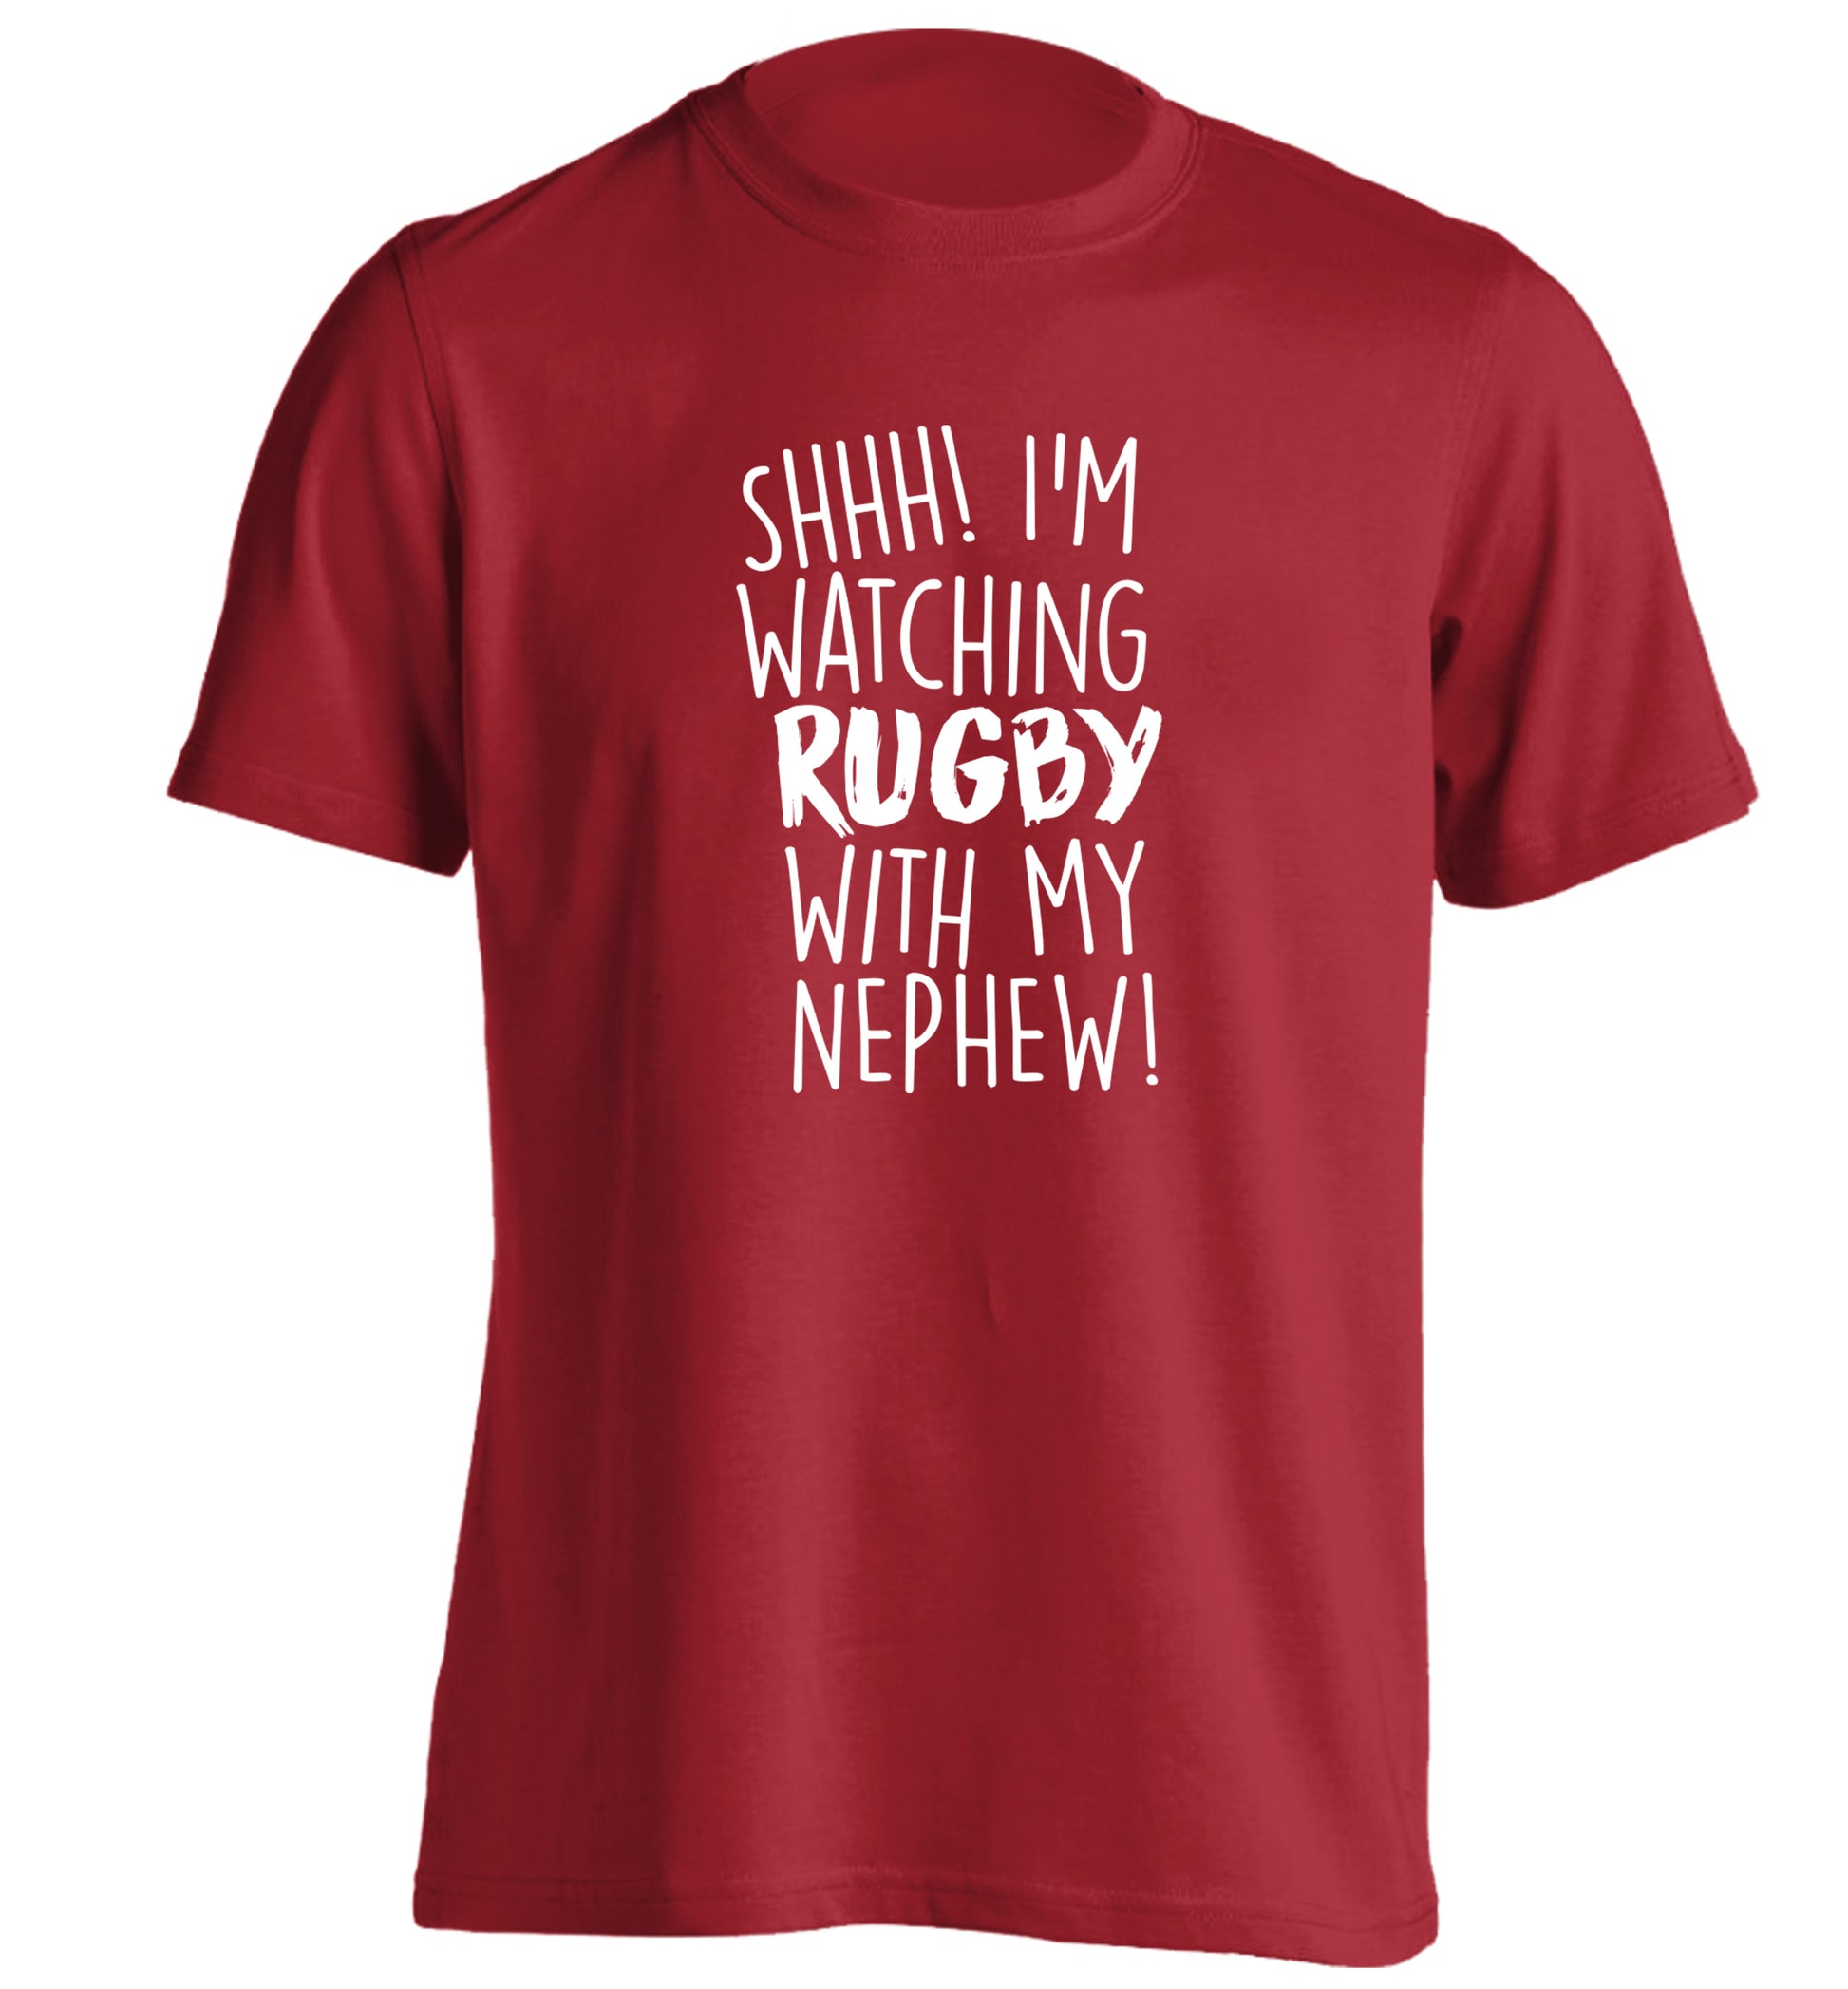 Shh.. I'm watching rugby with my nephew adults unisex red Tshirt 2XL